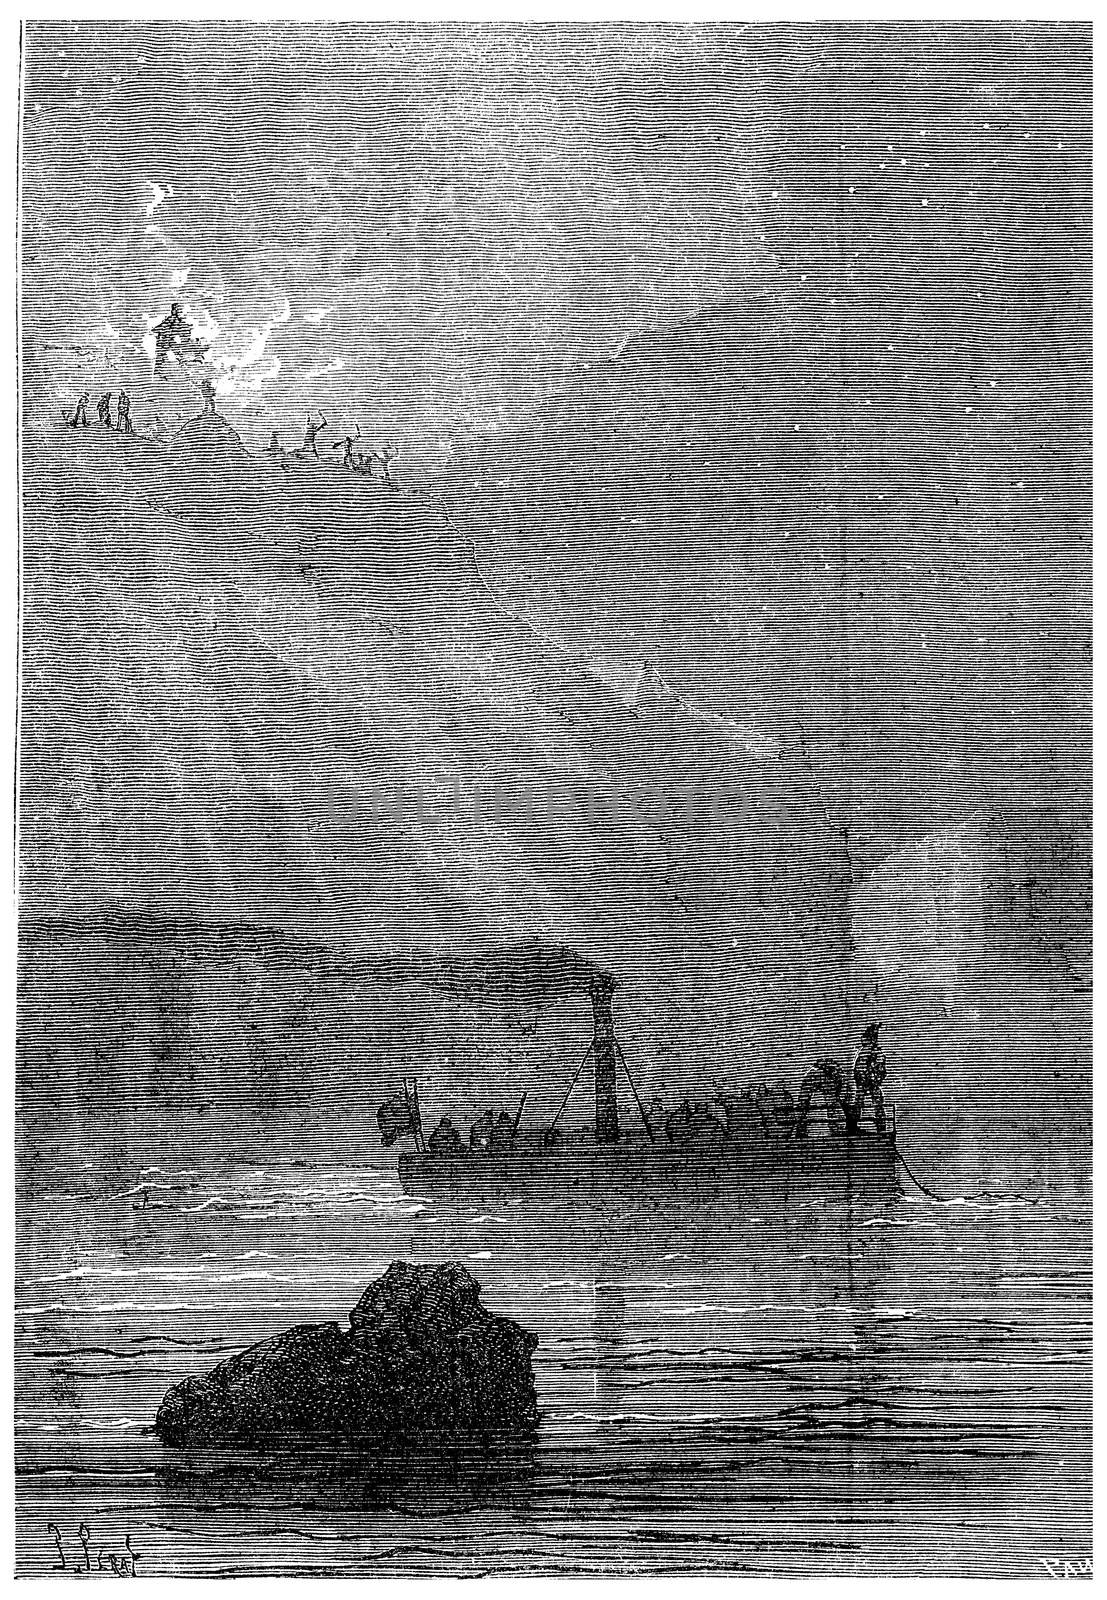 Soon the boat, vintage engraving. by Morphart